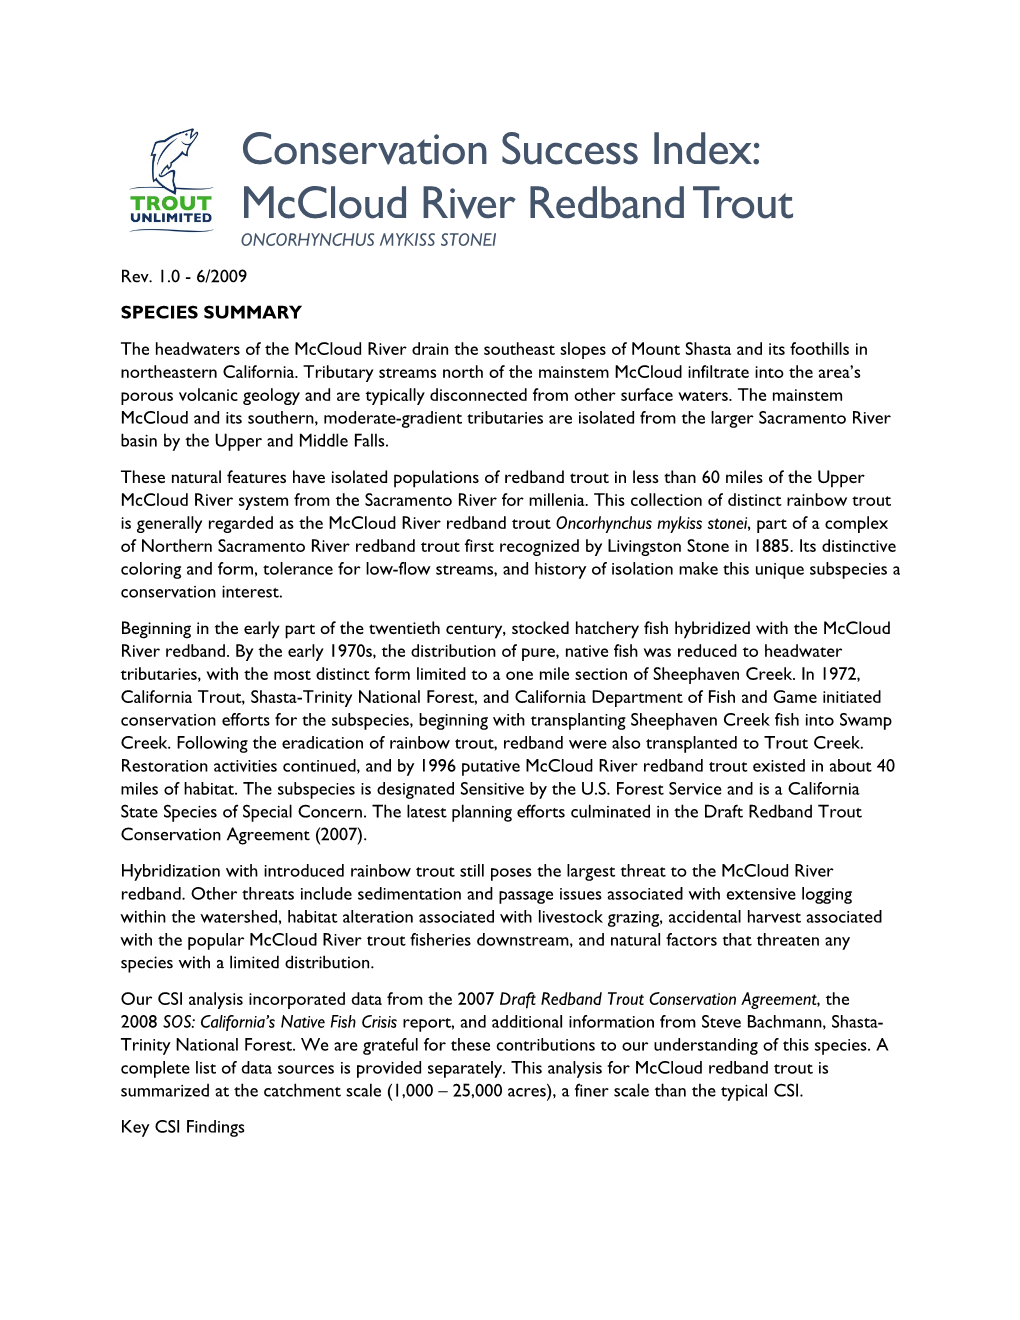 Conservation Success Index: Mccloud River Redband Trout ONCORHYNCHUS MYKISS STONEI Rev